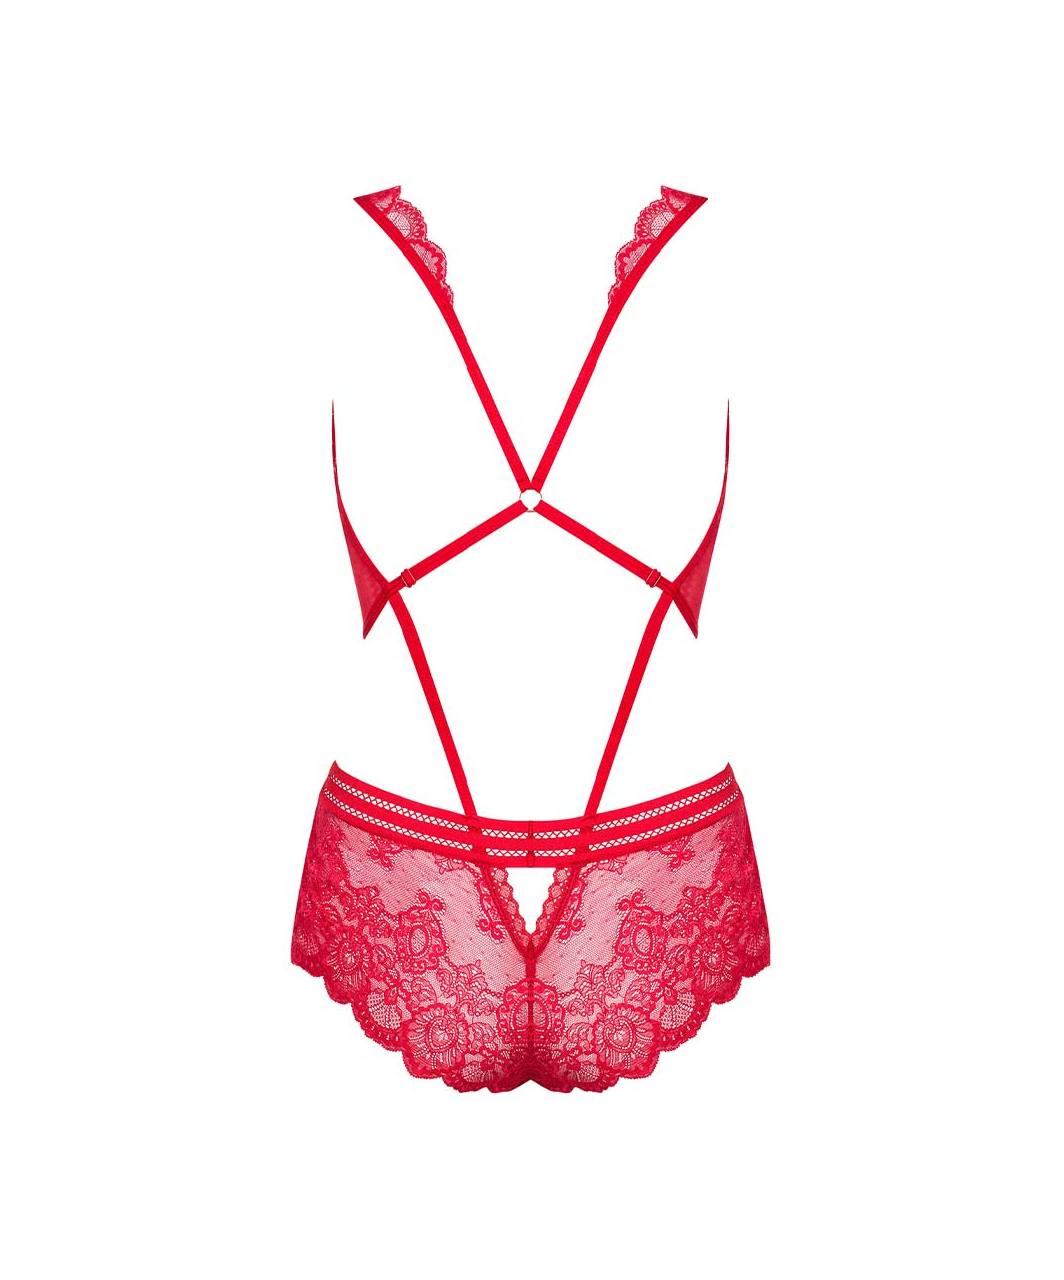 Obsessive red lace bodysuit